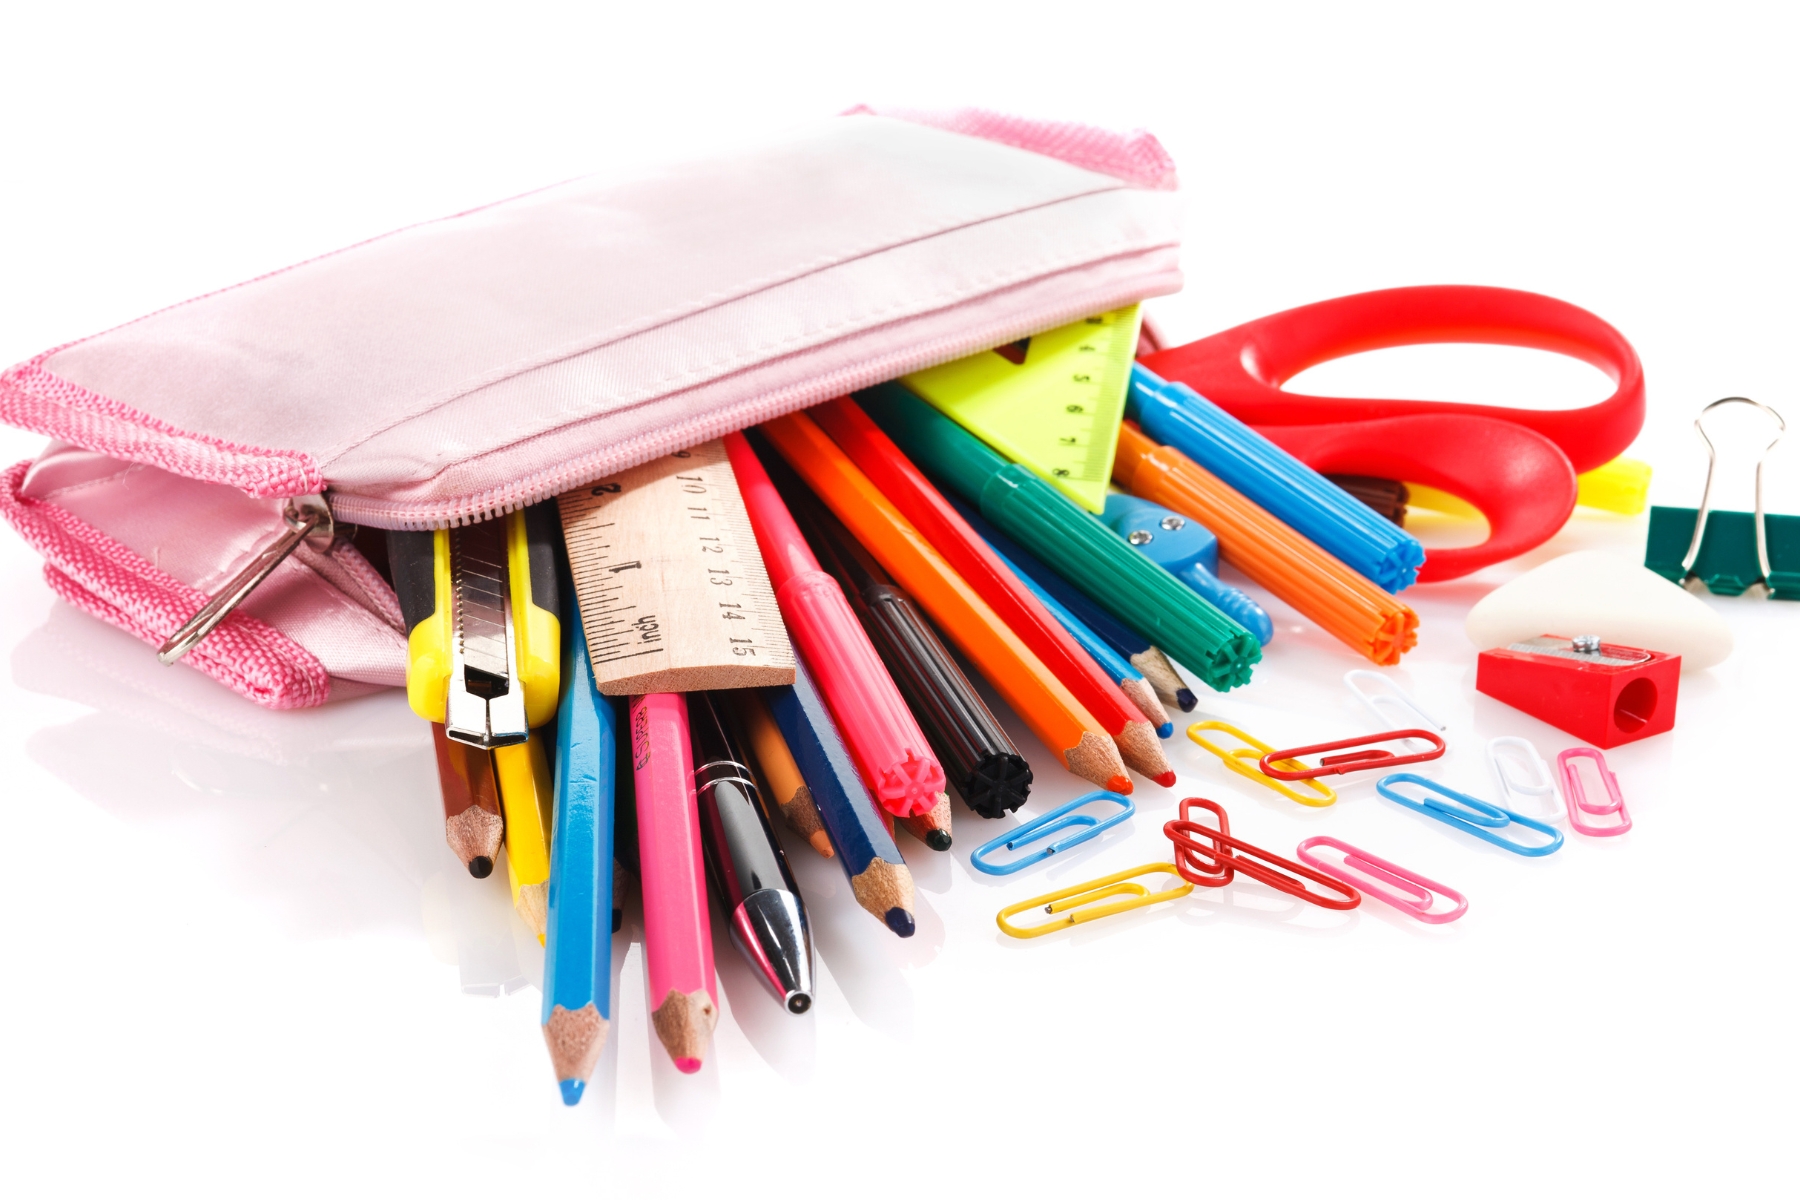 Pencils and other stationery items offer excellent personalisation potential